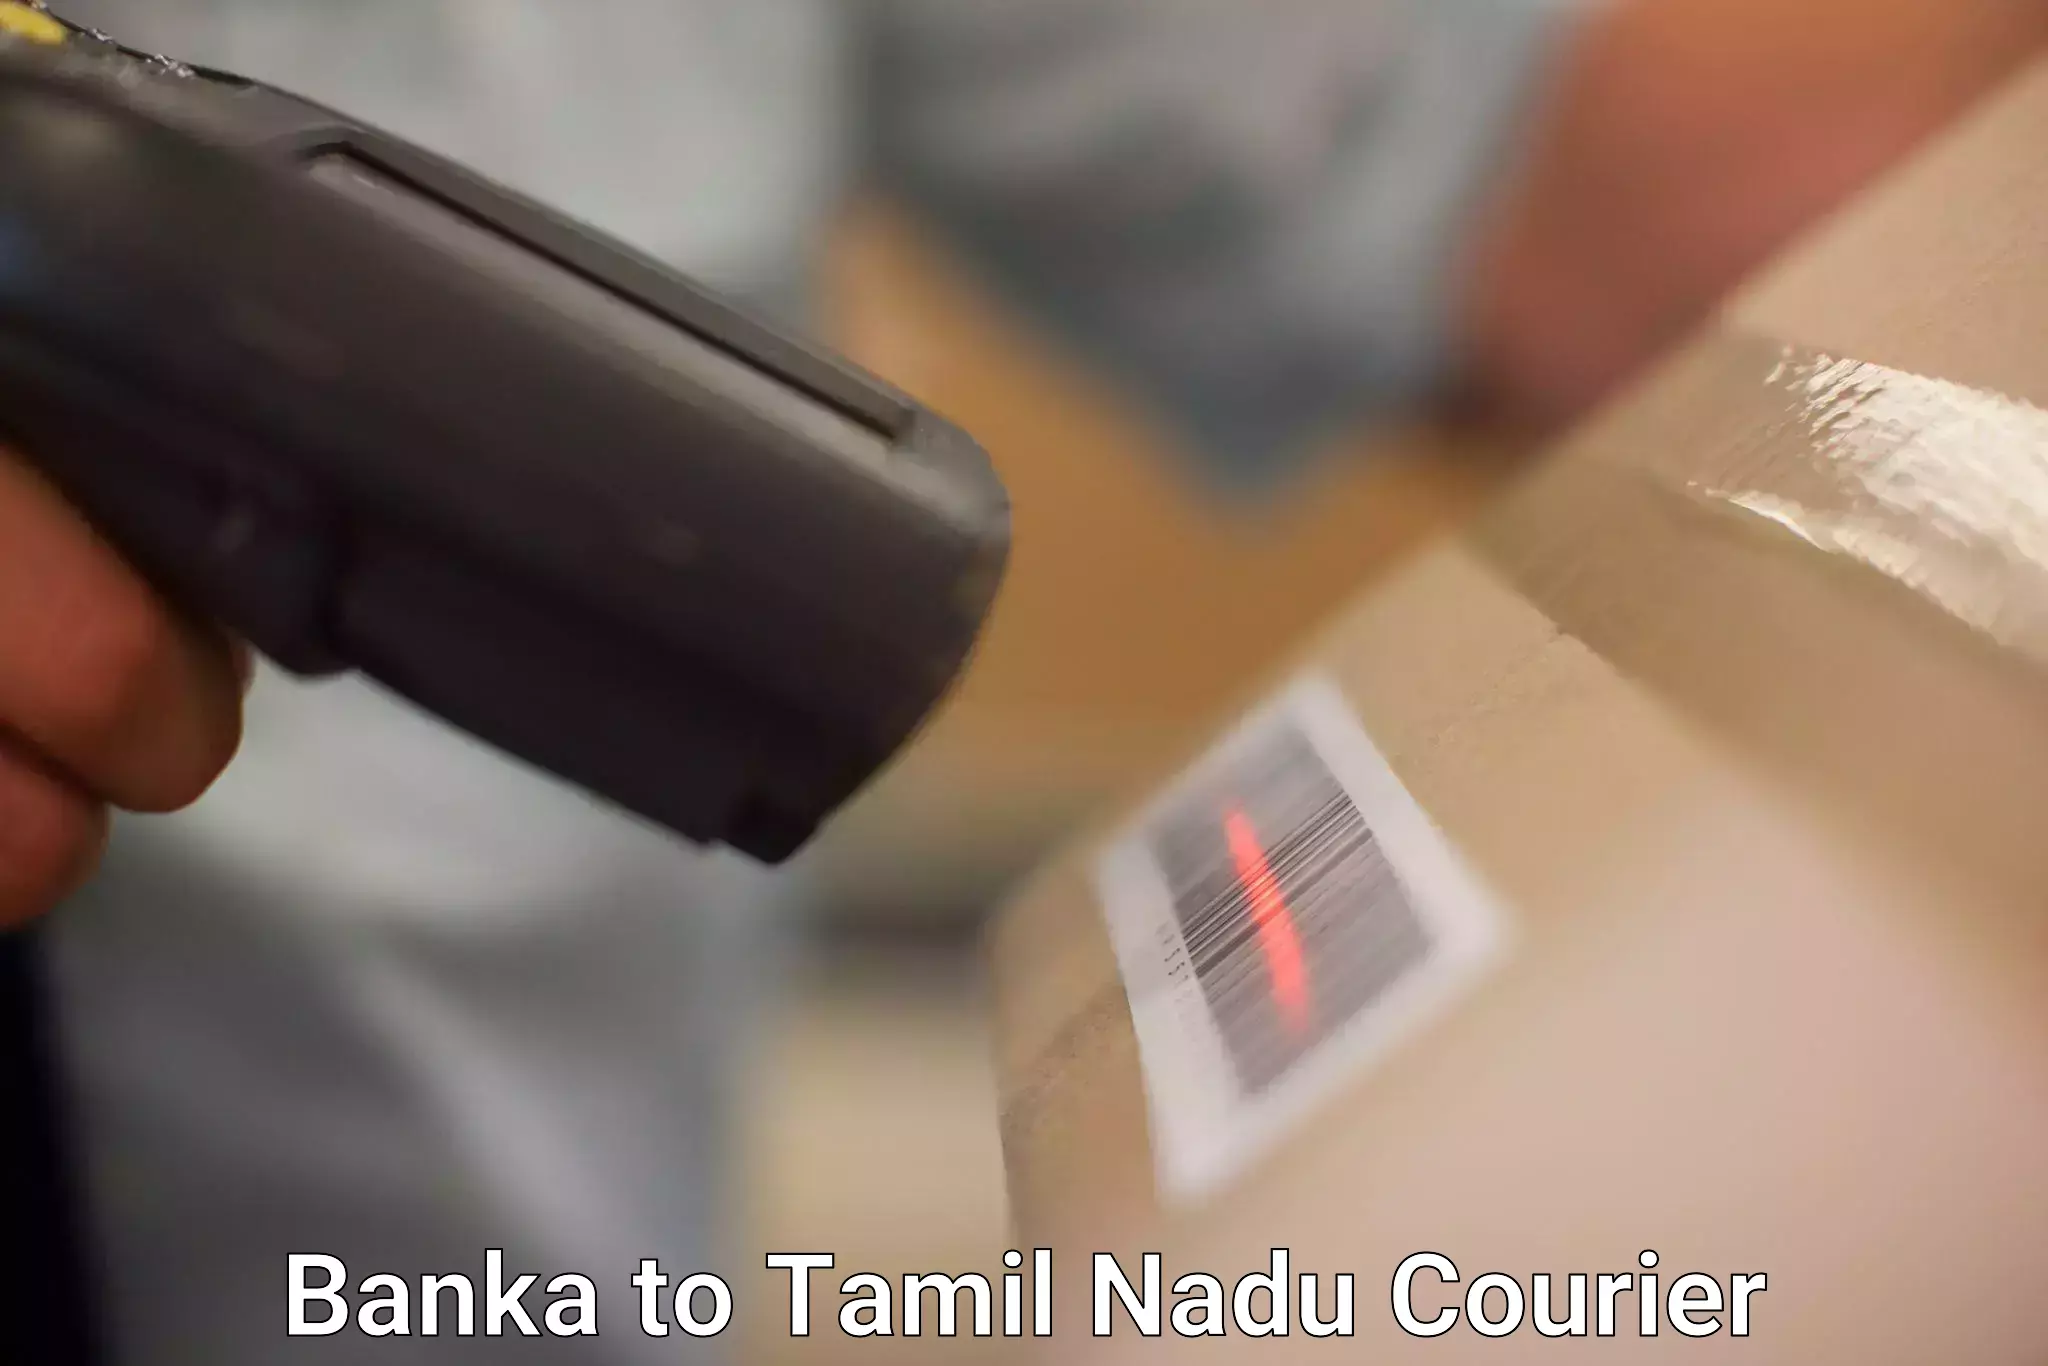 Tech-enabled shipping in Banka to Korattur